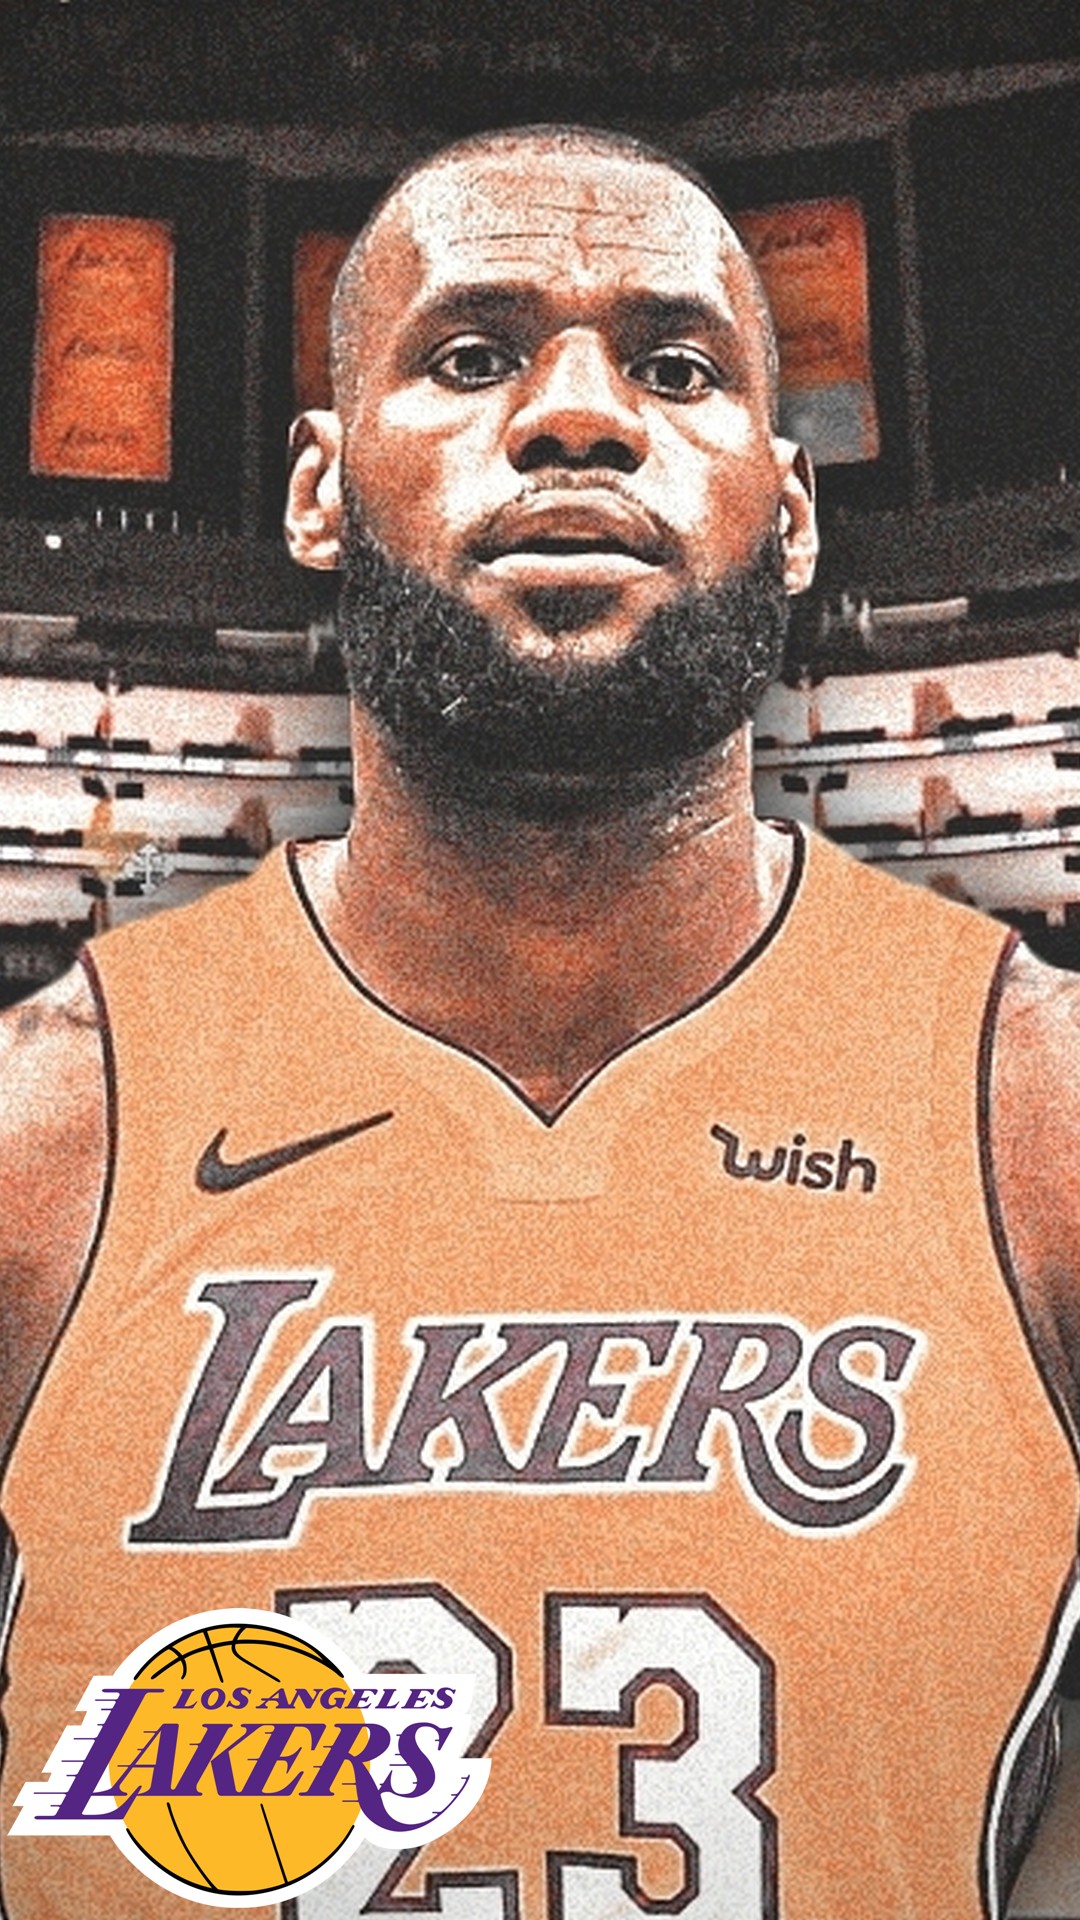 iPhone Wallpaper HD LA Lakers LeBron James with image dimensions 1080x1920 pixel. You can make this wallpaper for your Desktop Computer Backgrounds, Windows or Mac Screensavers, iPhone Lock screen, Tablet or Android and another Mobile Phone device